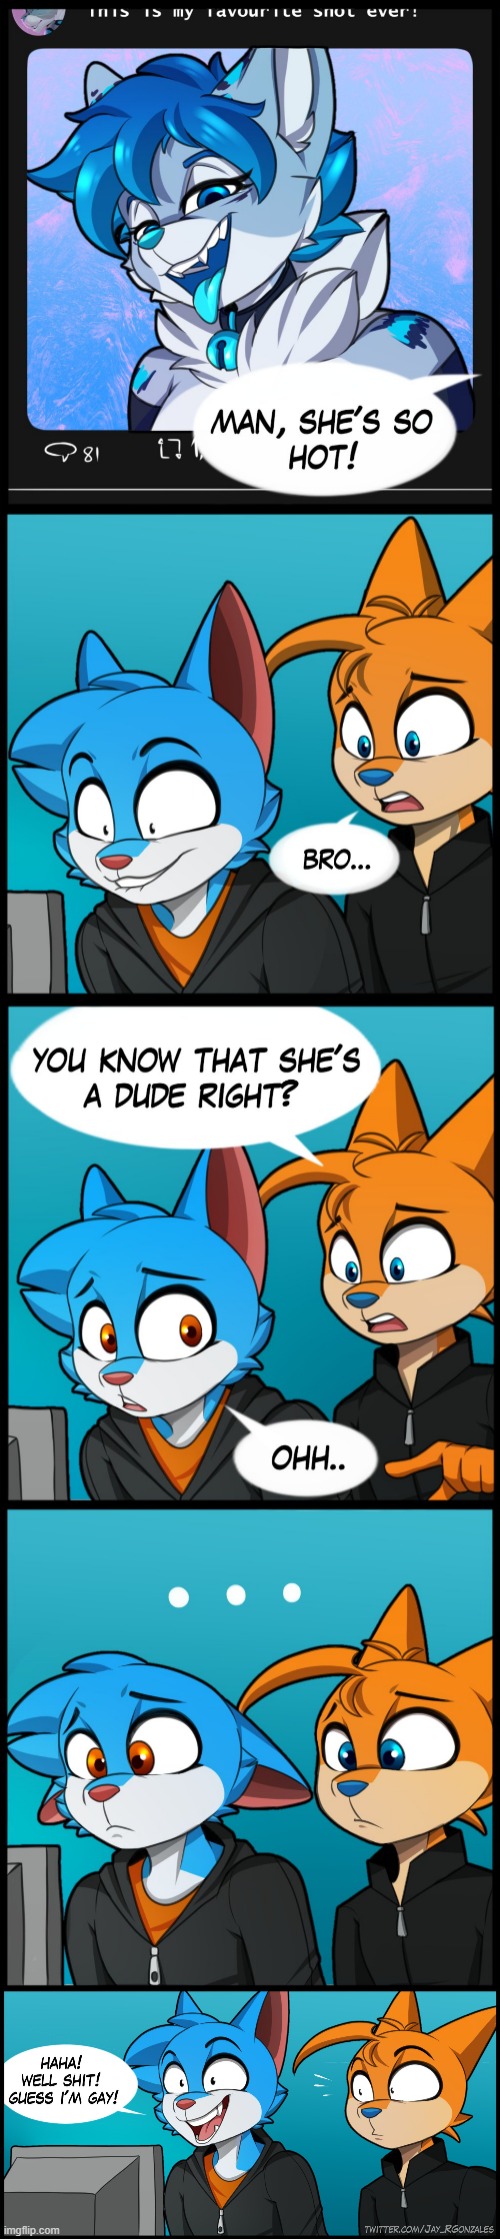 LOL, This is the Femboy_furry_sream in a nutshell xD (By Jay-R) | image tagged in furry,femboy,streams,comics/cartoons,memes,funny | made w/ Imgflip meme maker